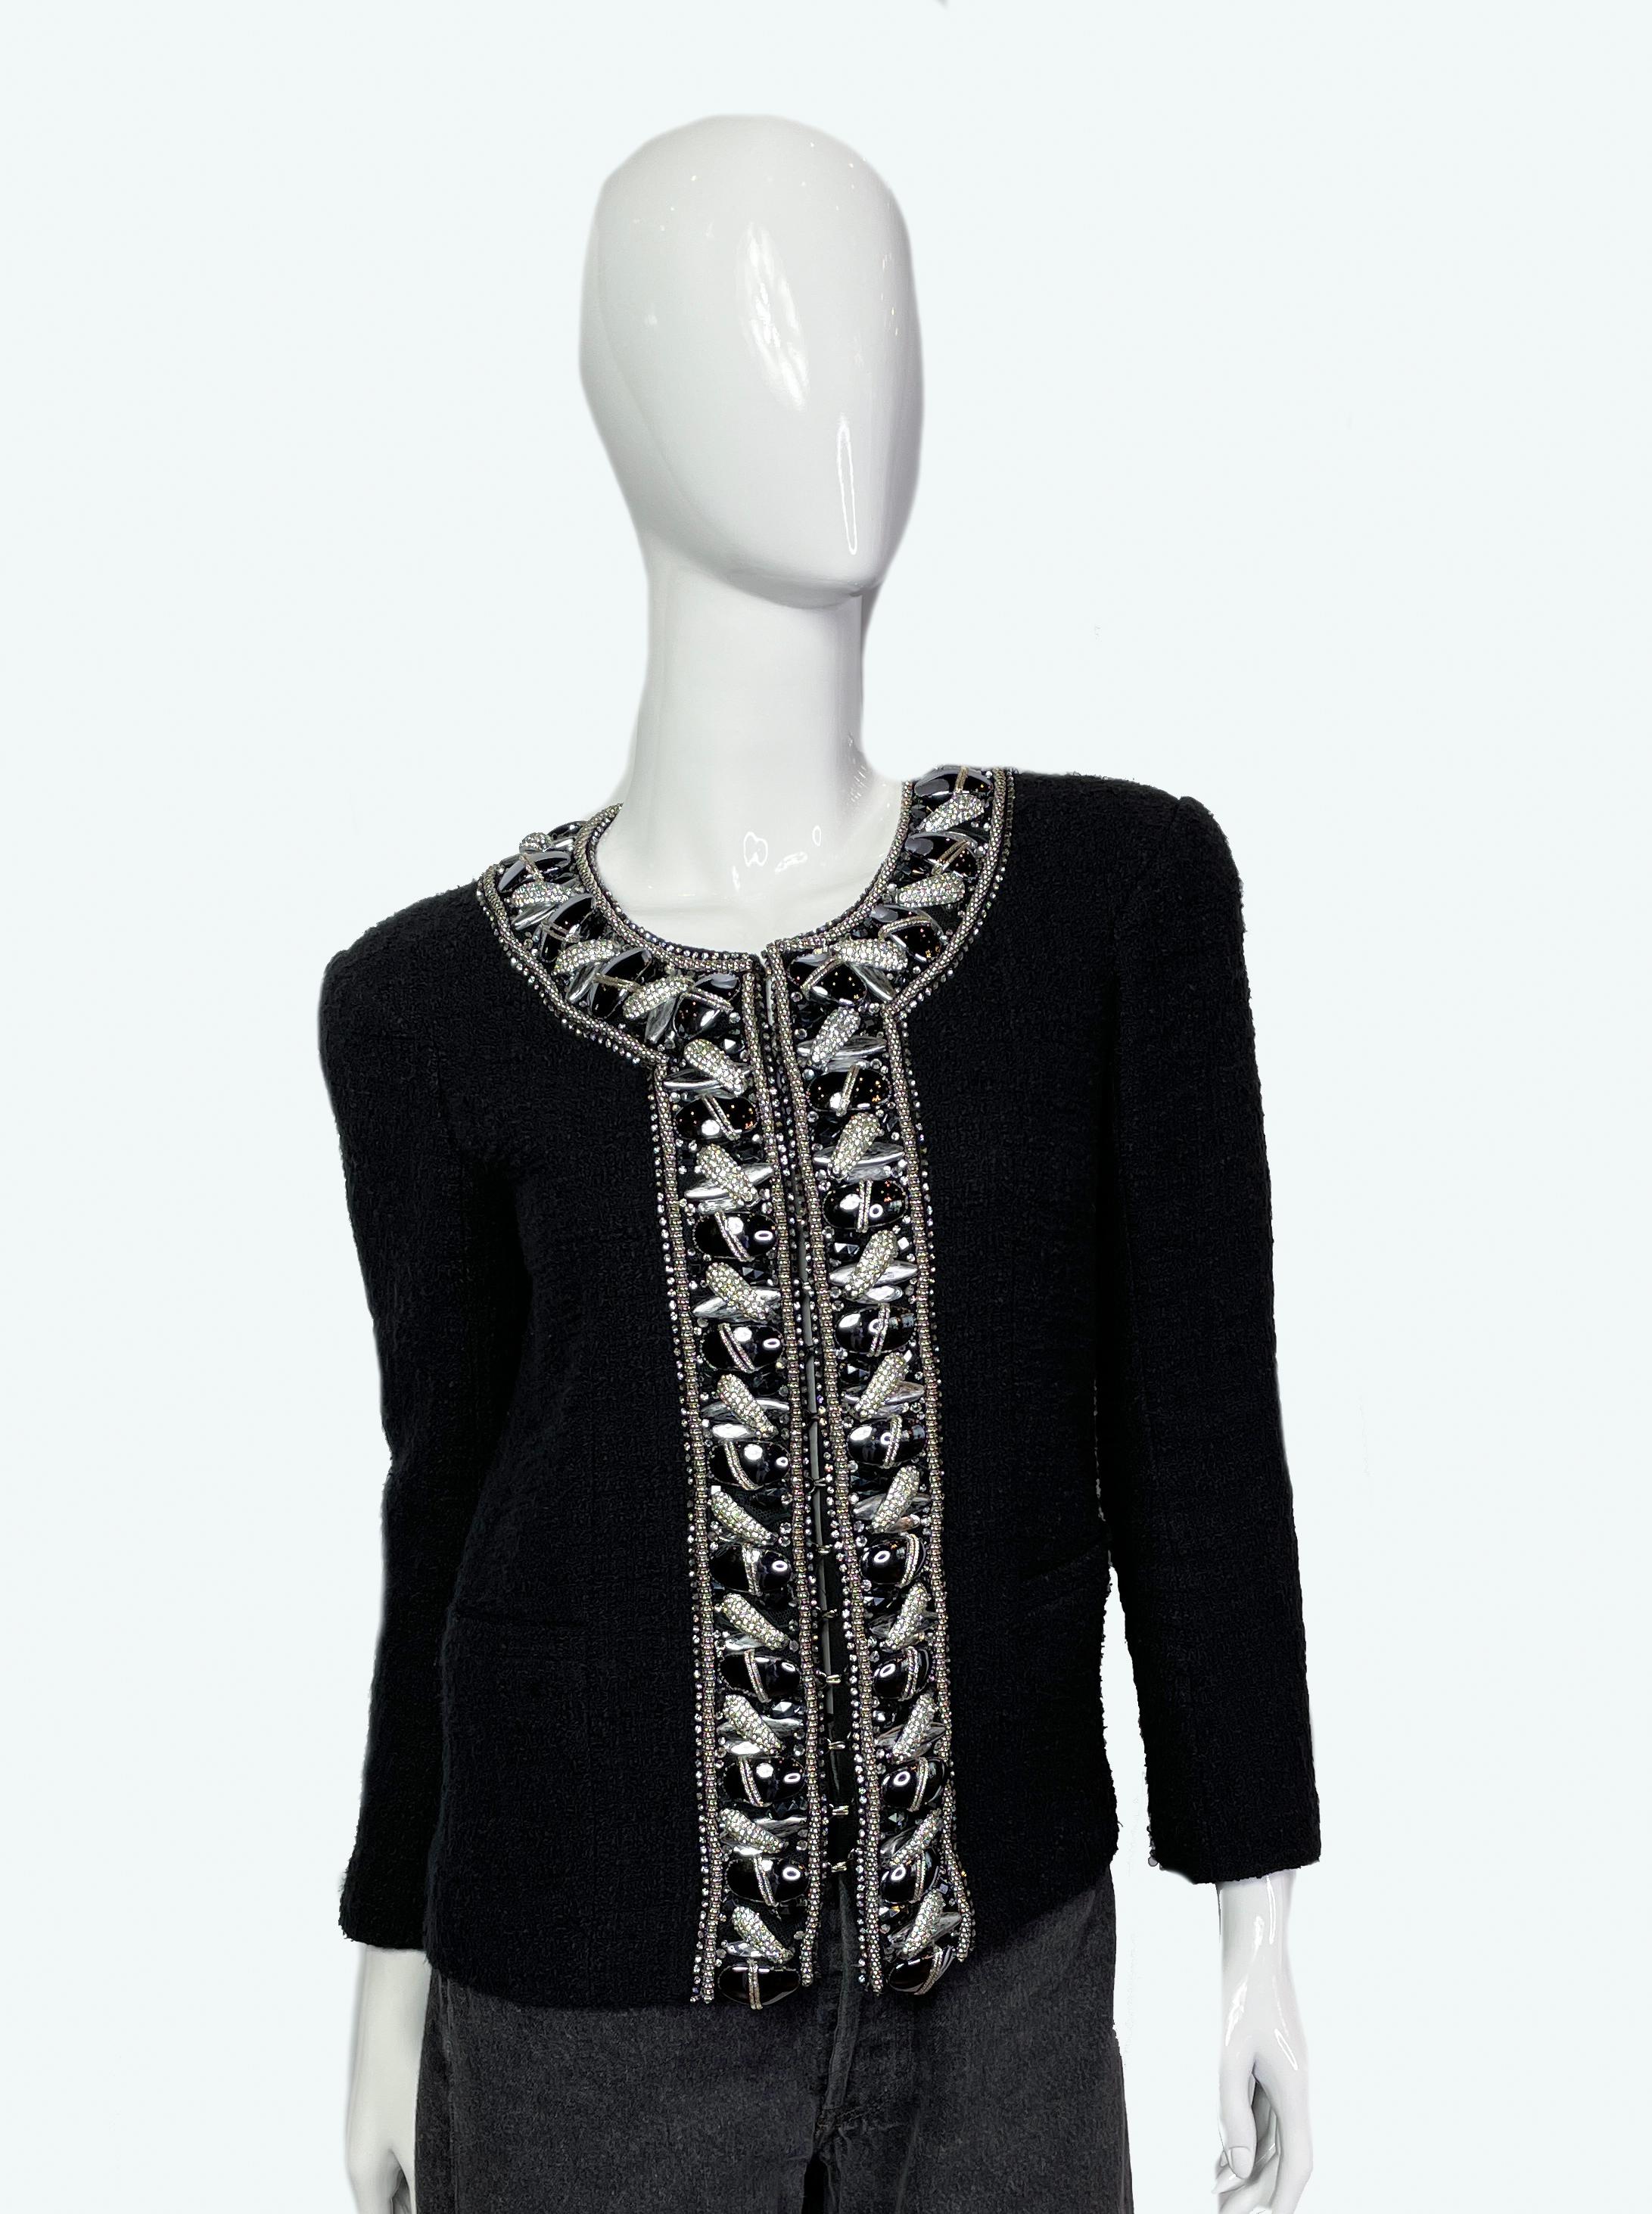 Stunning black runway Balmain blazer, decorated with rhinestones and faux pearls.

Year: 2009, Spring RTW collection by By Christophe Decarnin. Rare, exclusive item

Size: 36 Fr (XS-S)
Length: 54cm
Shoulder-to-shoulder: 41cm 
Sleeve length: